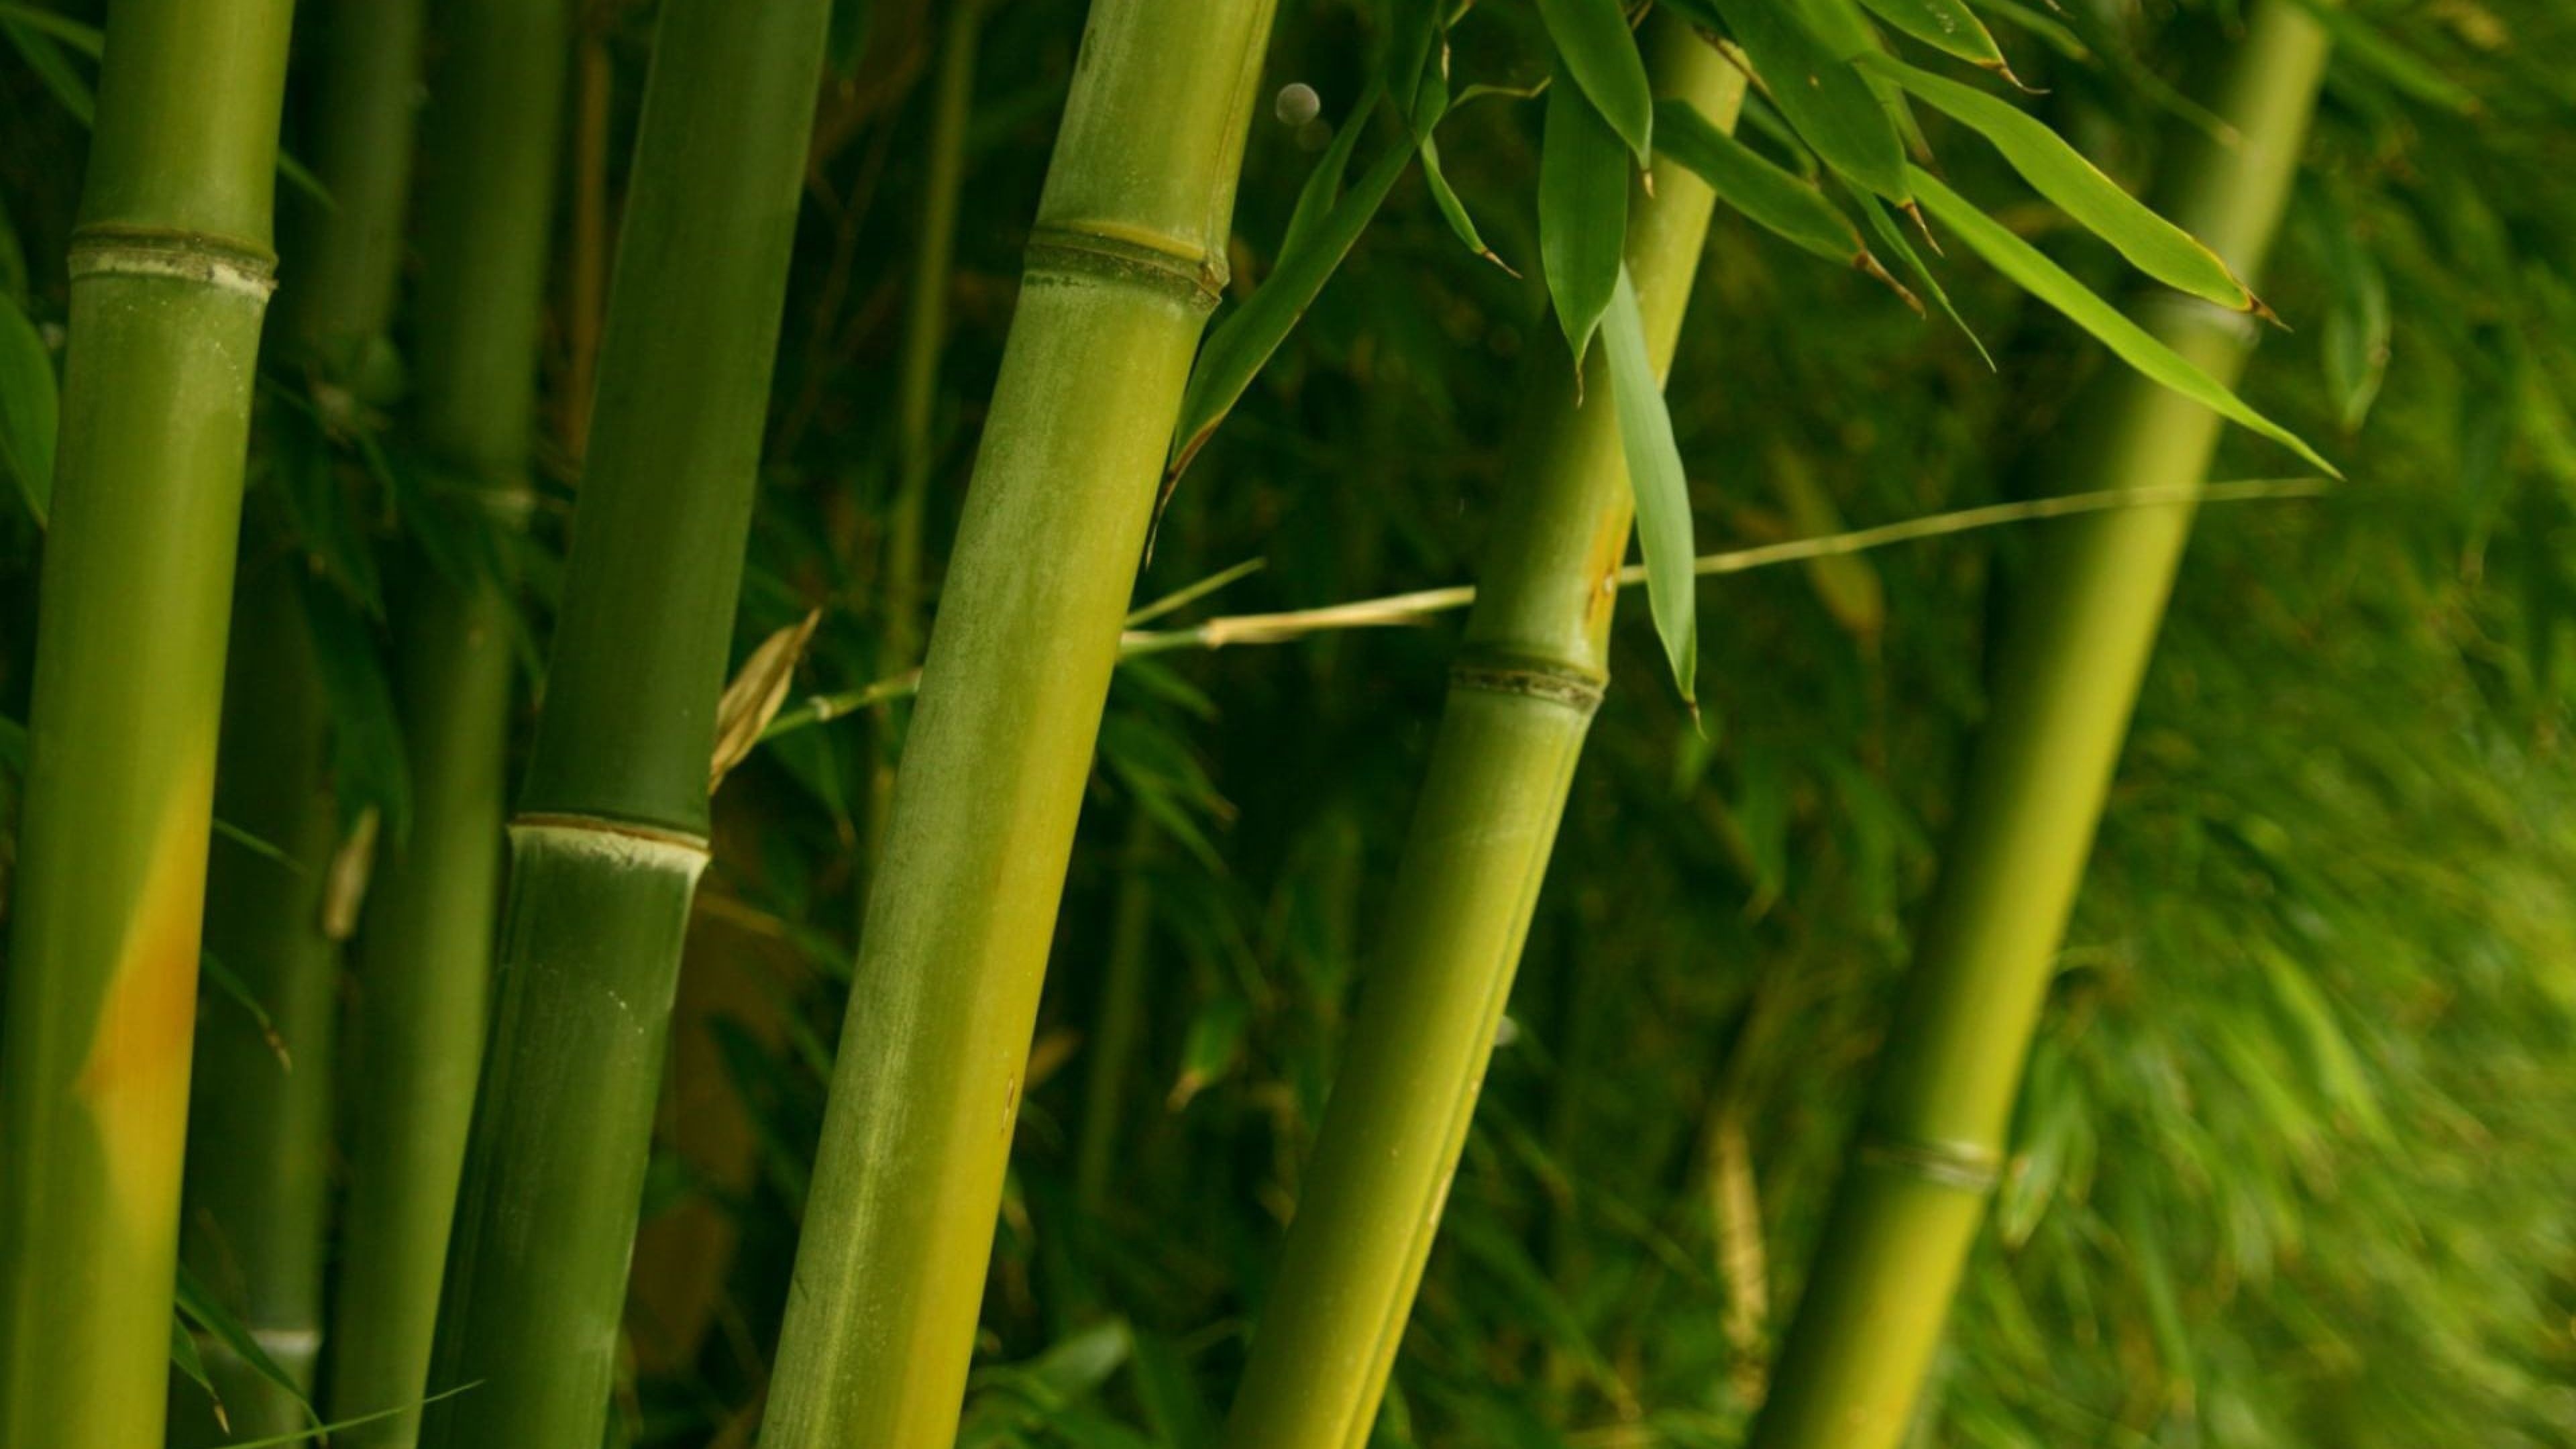 Bamboo: Evergreen perennial flowering plant, The largest members of the grass family. 3840x2160 4K Background.